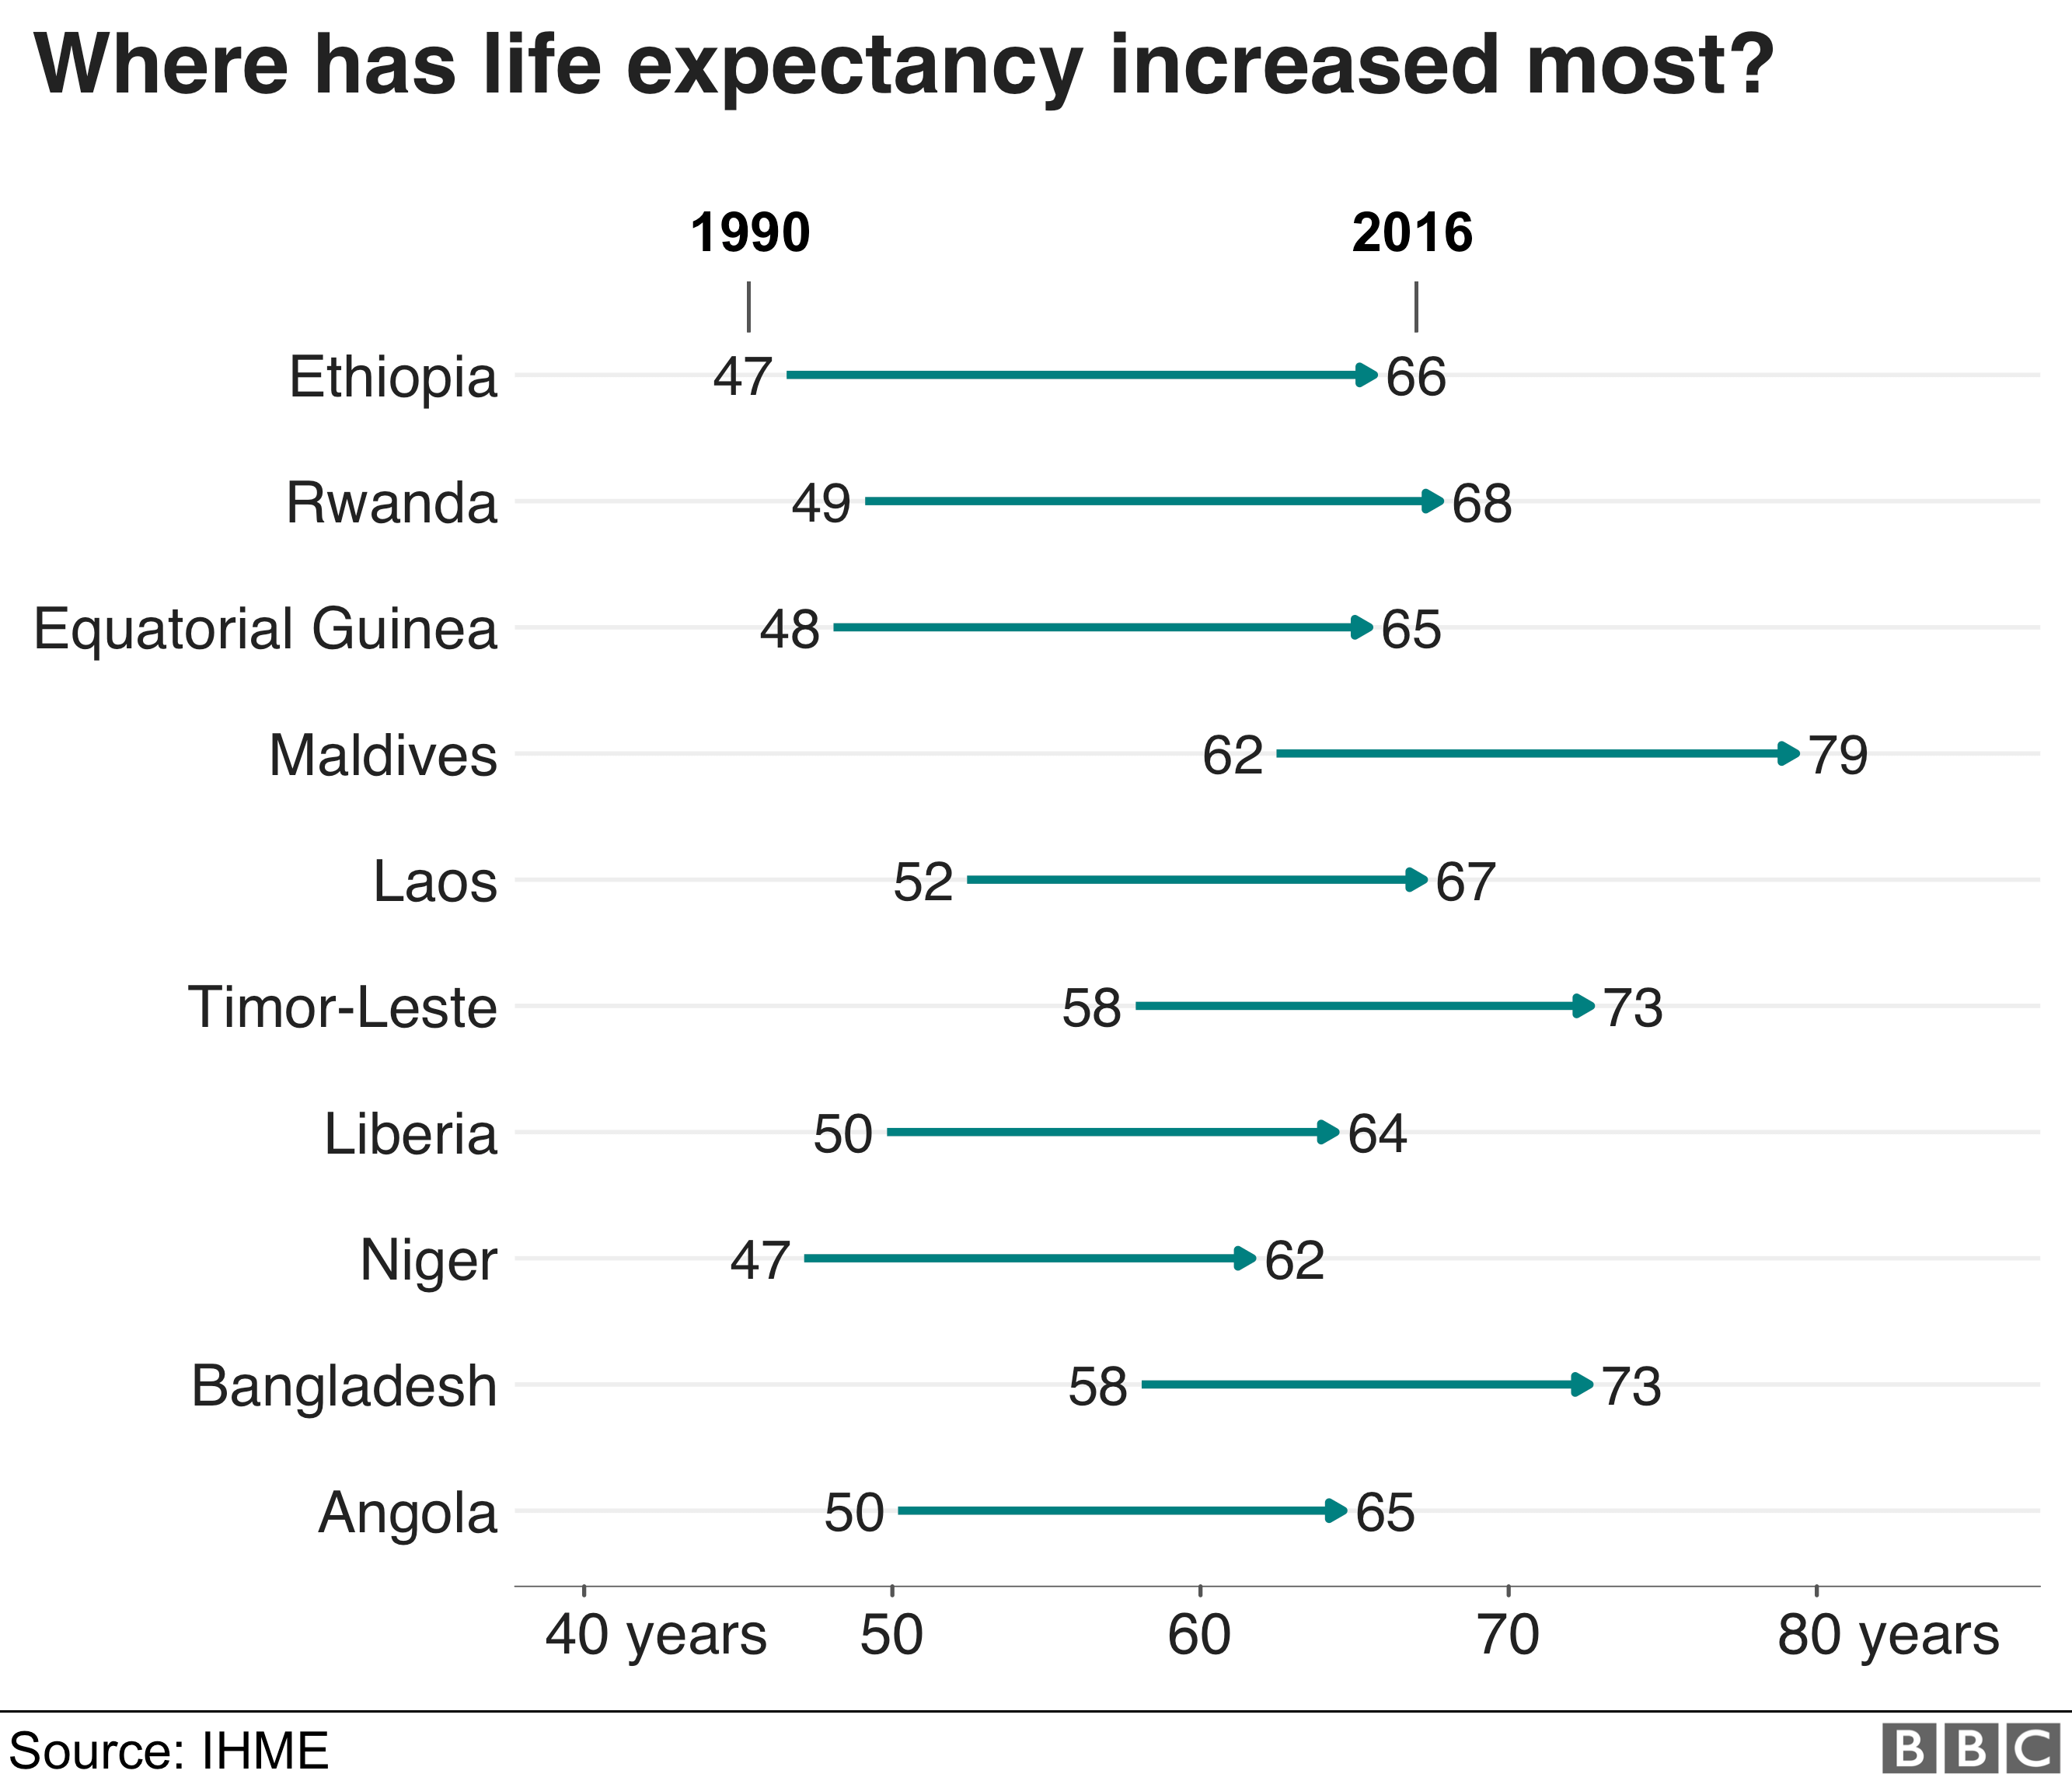 Ethiopia had the largest increase in life expectancy from 1990, going from 47 to 66 years